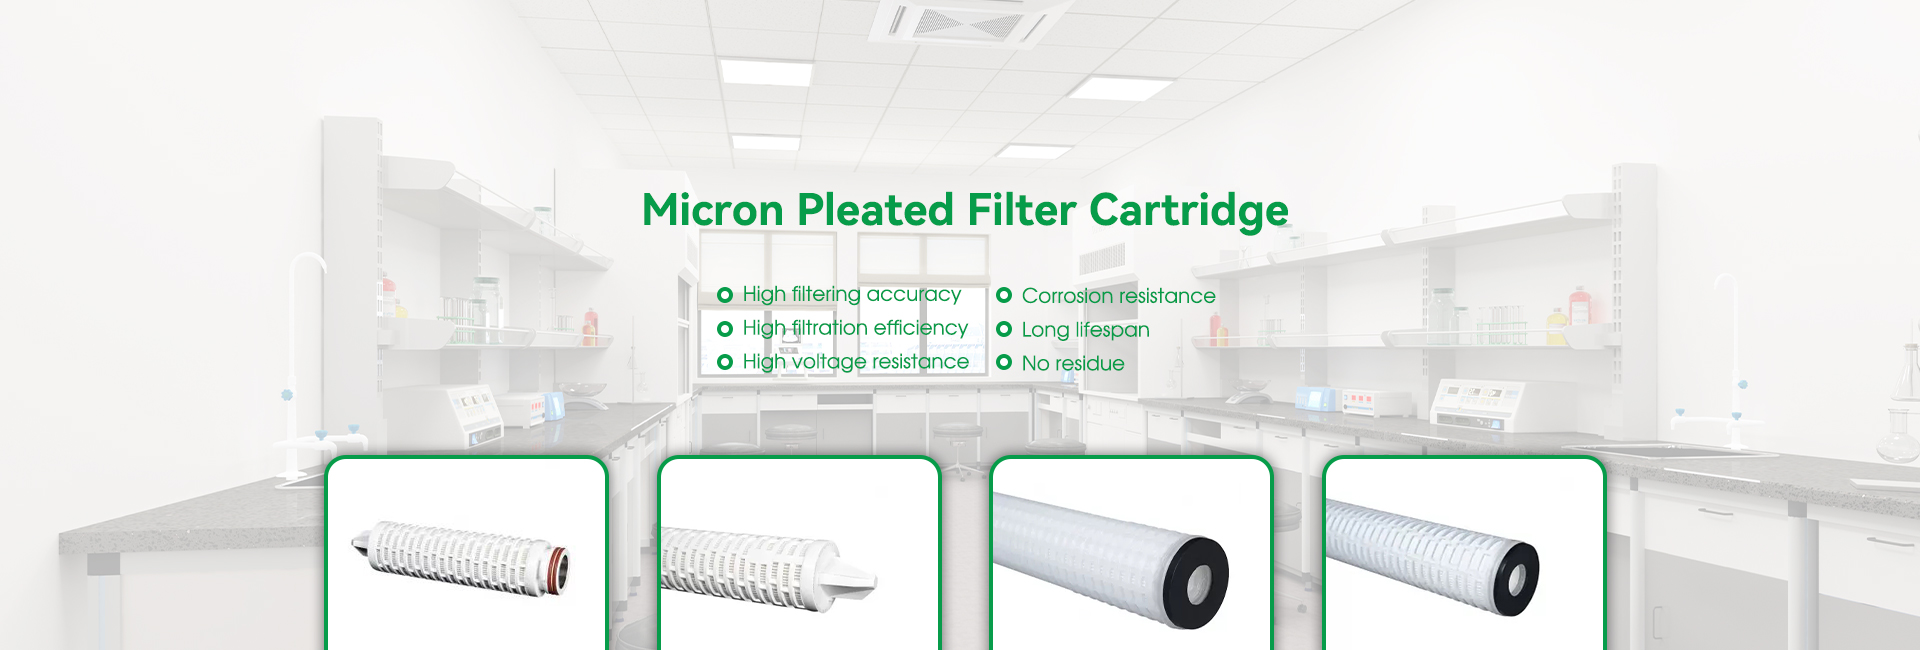 Micron Pleated Filter Cartridge Factory